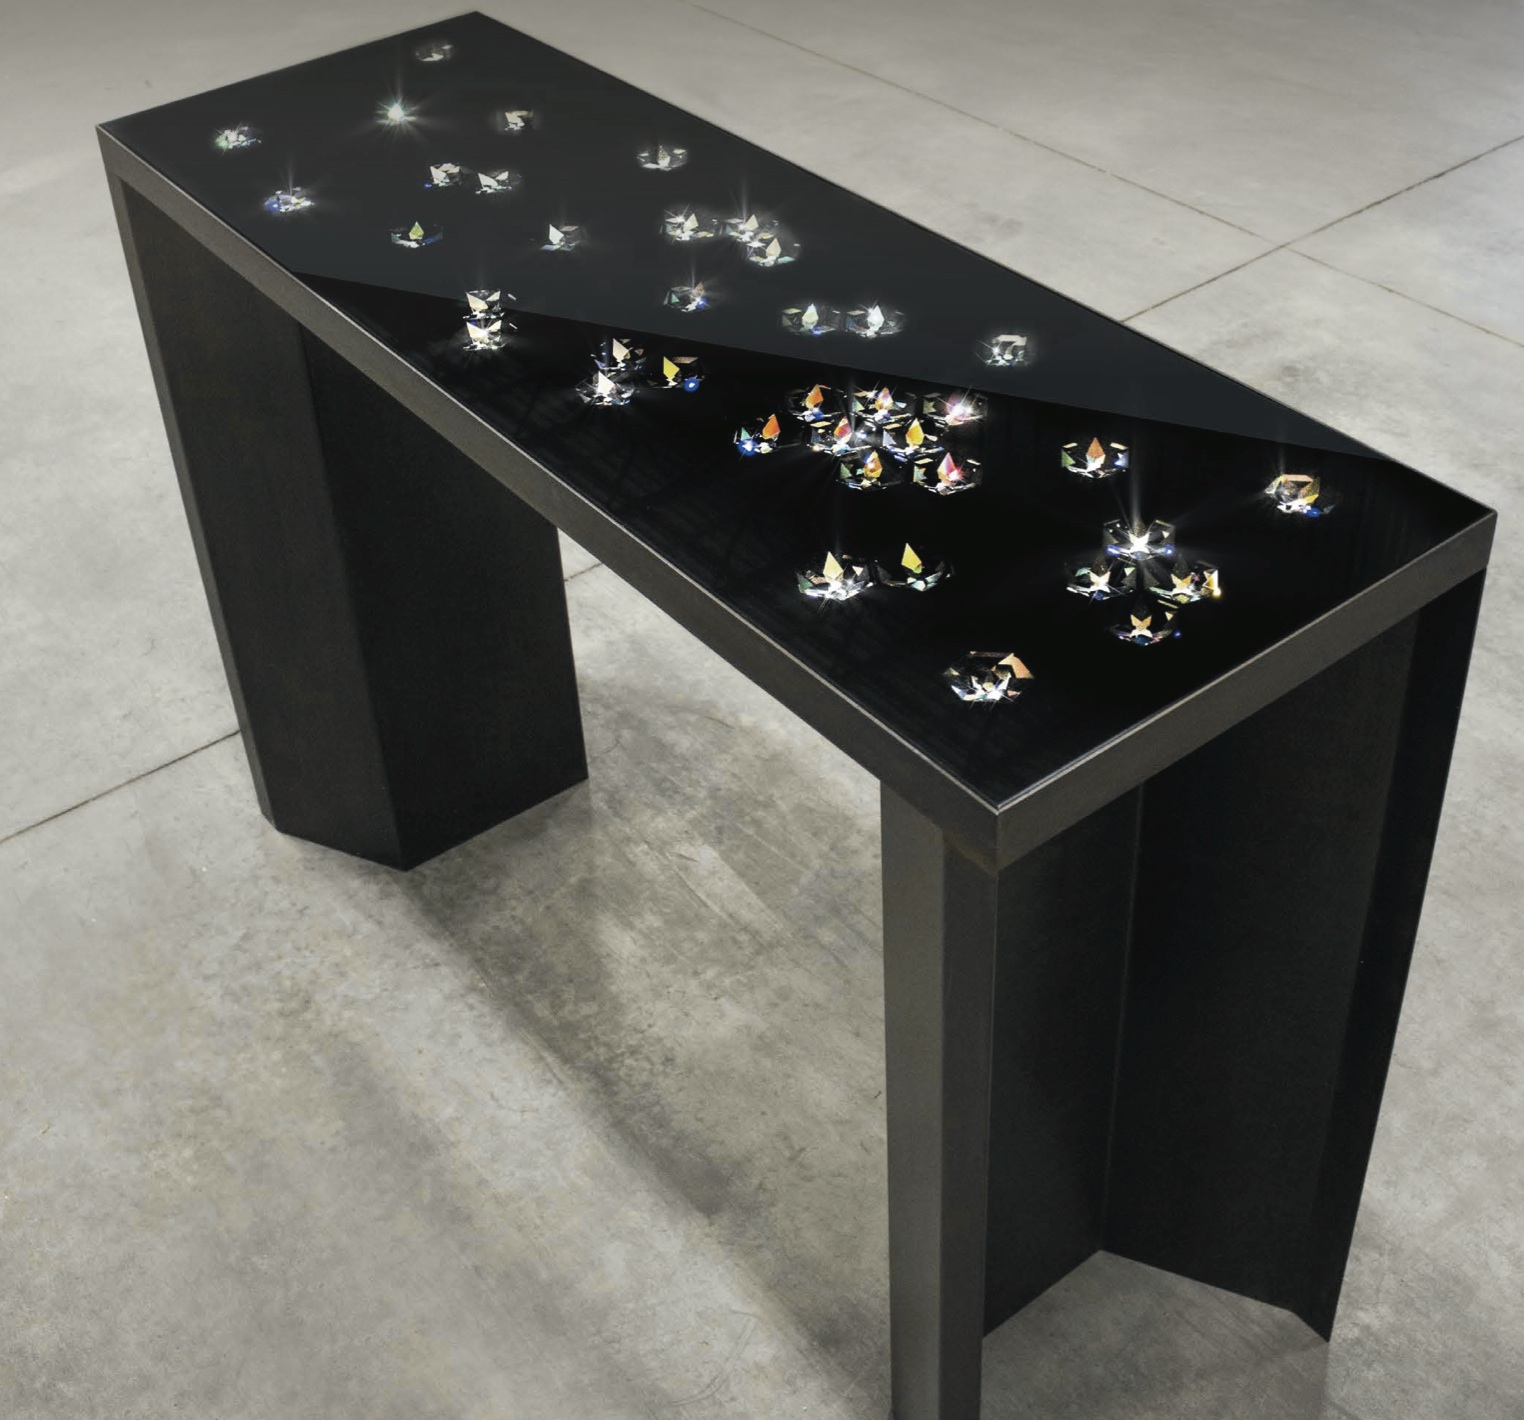 Hexa Table from Orion HD